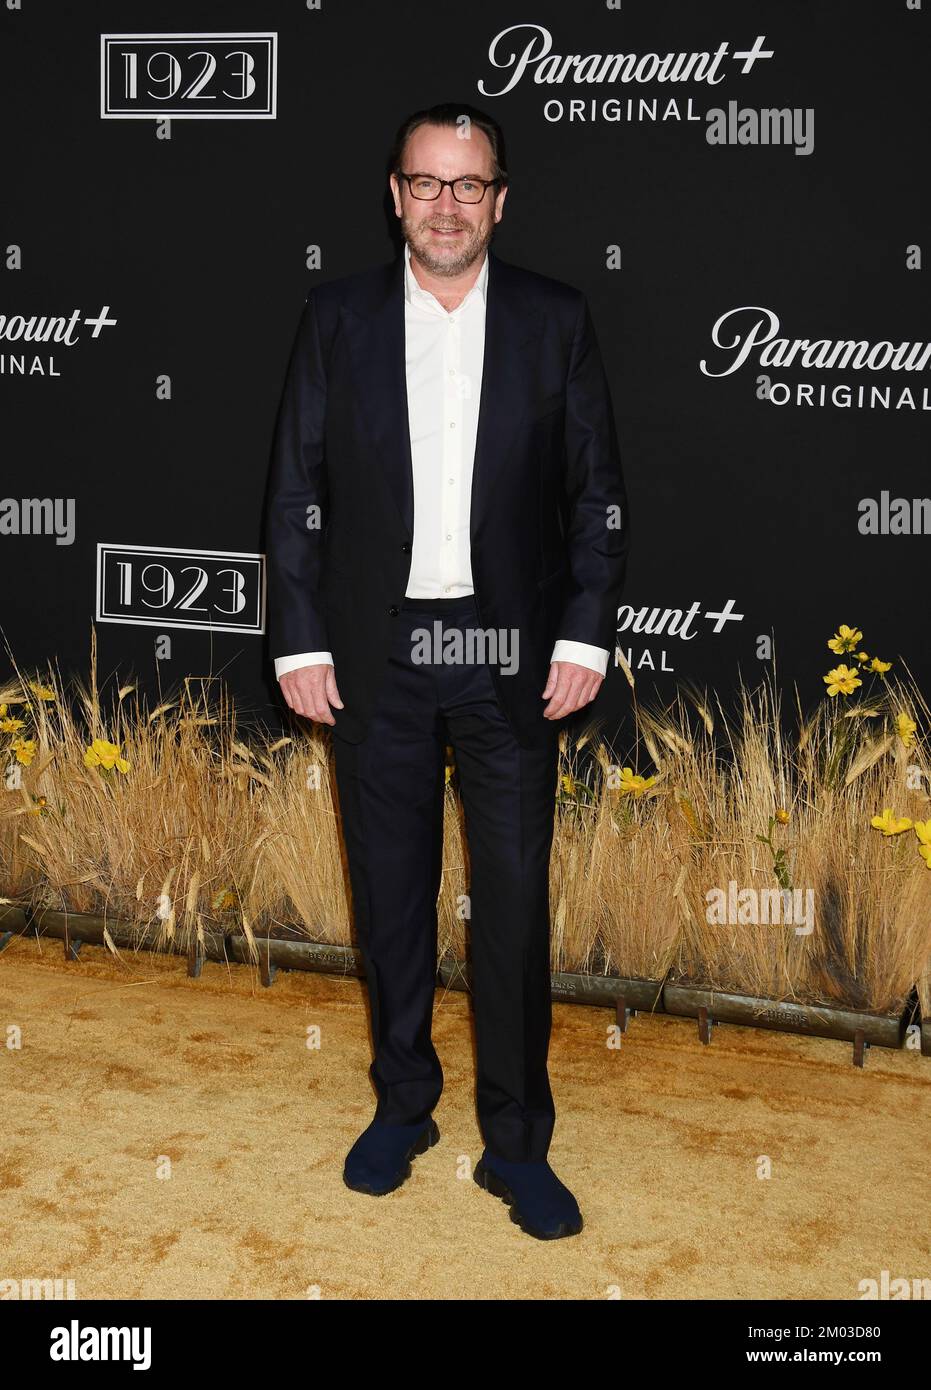 LOS ANGELES, CALIFORNIA - DECEMBER 02: Tom Ryan attends the Los Angeles Premiere Of Paramount+'s '1923' at Hollywood American Legion on December 02, 2 Stock Photo